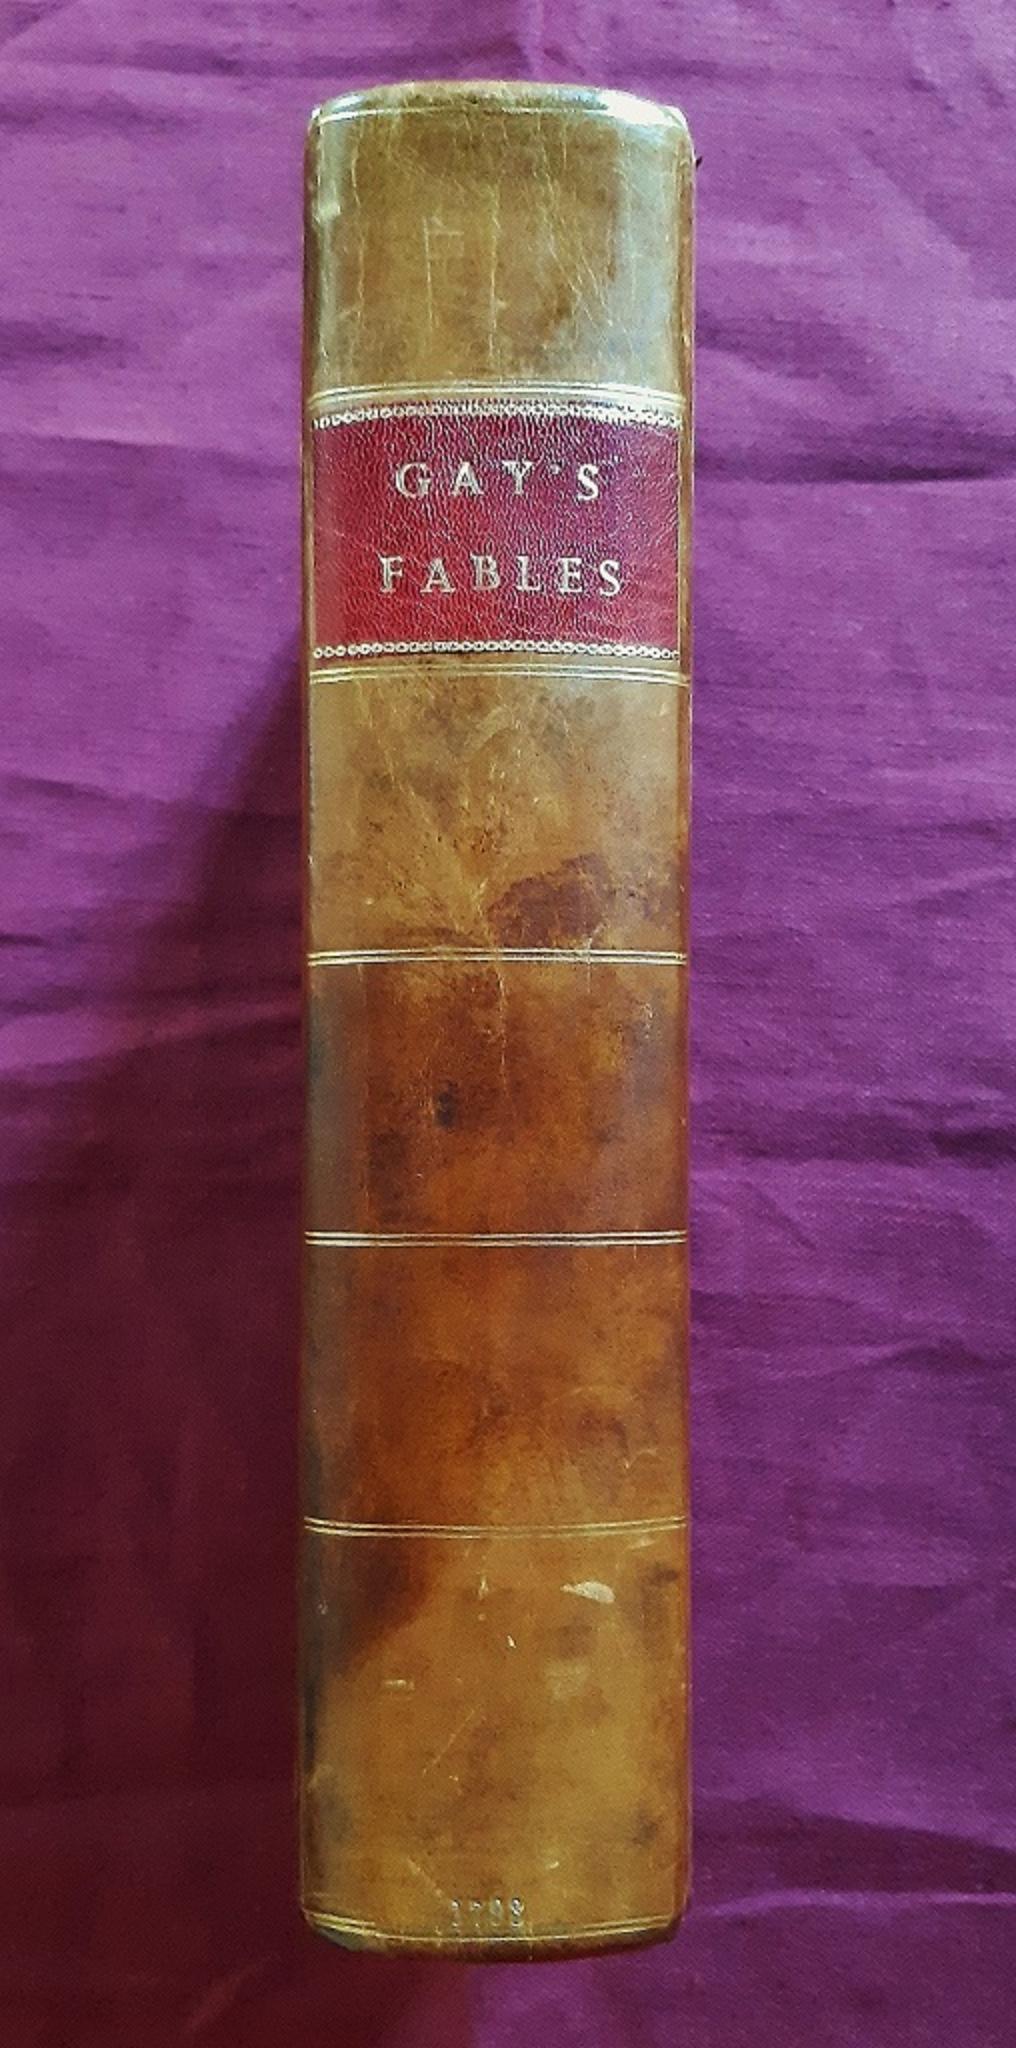 Fables is an original Modern Rare book engraved by Sir William Blake (London, 1757 - London, 1827) and written by John Gay (Barnstaple, 1685 – London, 1732) in 1793.

Full title: 